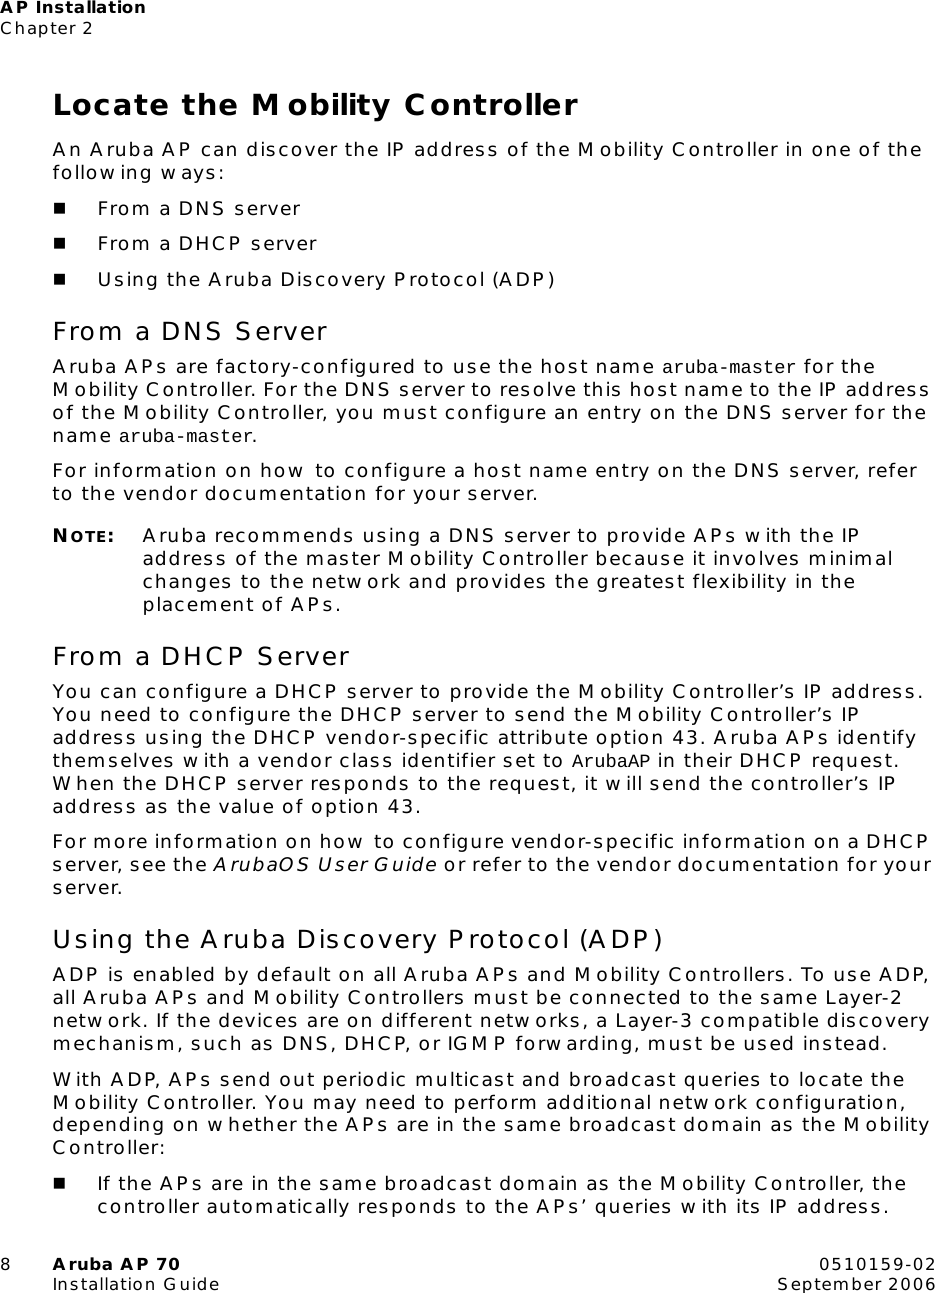 AP InstallationChapter 28Aruba AP 70 0510159-02Installation Guide September 2006Locate the Mobility ControllerAn Aruba AP can discover the IP address of the Mobility Controller in one of the following ways:From a DNS serverFrom a DHCP serverUsing the Aruba Discovery Protocol (ADP)From a DNS ServerAruba APs are factory-configured to use the host name aruba-master for the Mobility Controller. For the DNS server to resolve this host name to the IP address of the Mobility Controller, you must configure an entry on the DNS server for the name aruba-master.For information on how to configure a host name entry on the DNS server, refer to the vendor documentation for your server.NOTE:Aruba recommends using a DNS server to provide APs with the IP address of the master Mobility Controller because it involves minimal changes to the network and provides the greatest flexibility in the placement of APs.From a DHCP ServerYou can configure a DHCP server to provide the Mobility Controller’s IP address. You need to configure the DHCP server to send the Mobility Controller’s IP address using the DHCP vendor-specific attribute option 43. Aruba APs identify themselves with a vendor class identifier set to ArubaAP in their DHCP request. When the DHCP server responds to the request, it will send the controller’s IP address as the value of option 43.For more information on how to configure vendor-specific information on a DHCP server, see the ArubaOS User Guide or refer to the vendor documentation for your server.Using the Aruba Discovery Protocol (ADP)ADP is enabled by default on all Aruba APs and Mobility Controllers. To use ADP, all Aruba APs and Mobility Controllers must be connected to the same Layer-2 network. If the devices are on different networks, a Layer-3 compatible discovery mechanism, such as DNS, DHCP, or IGMP forwarding, must be used instead.With ADP, APs send out periodic multicast and broadcast queries to locate the Mobility Controller. You may need to perform additional network configuration, depending on whether the APs are in the same broadcast domain as the Mobility Controller:If the APs are in the same broadcast domain as the Mobility Controller, the controller automatically responds to the APs’ queries with its IP address.